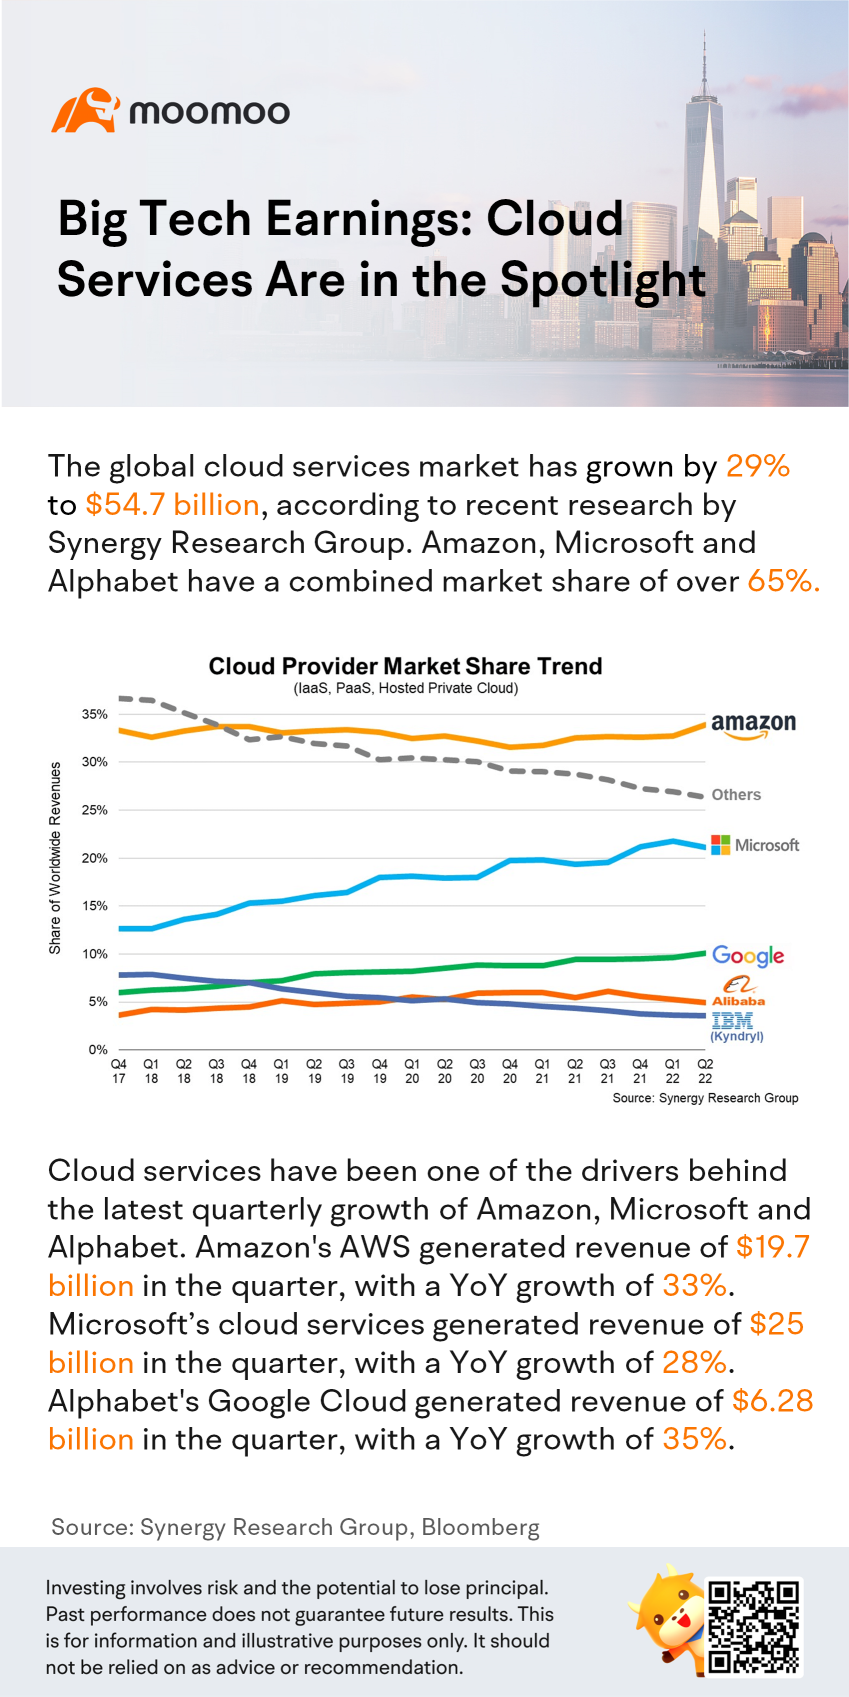 Big tech earnings: Cloud services are in the spotlight